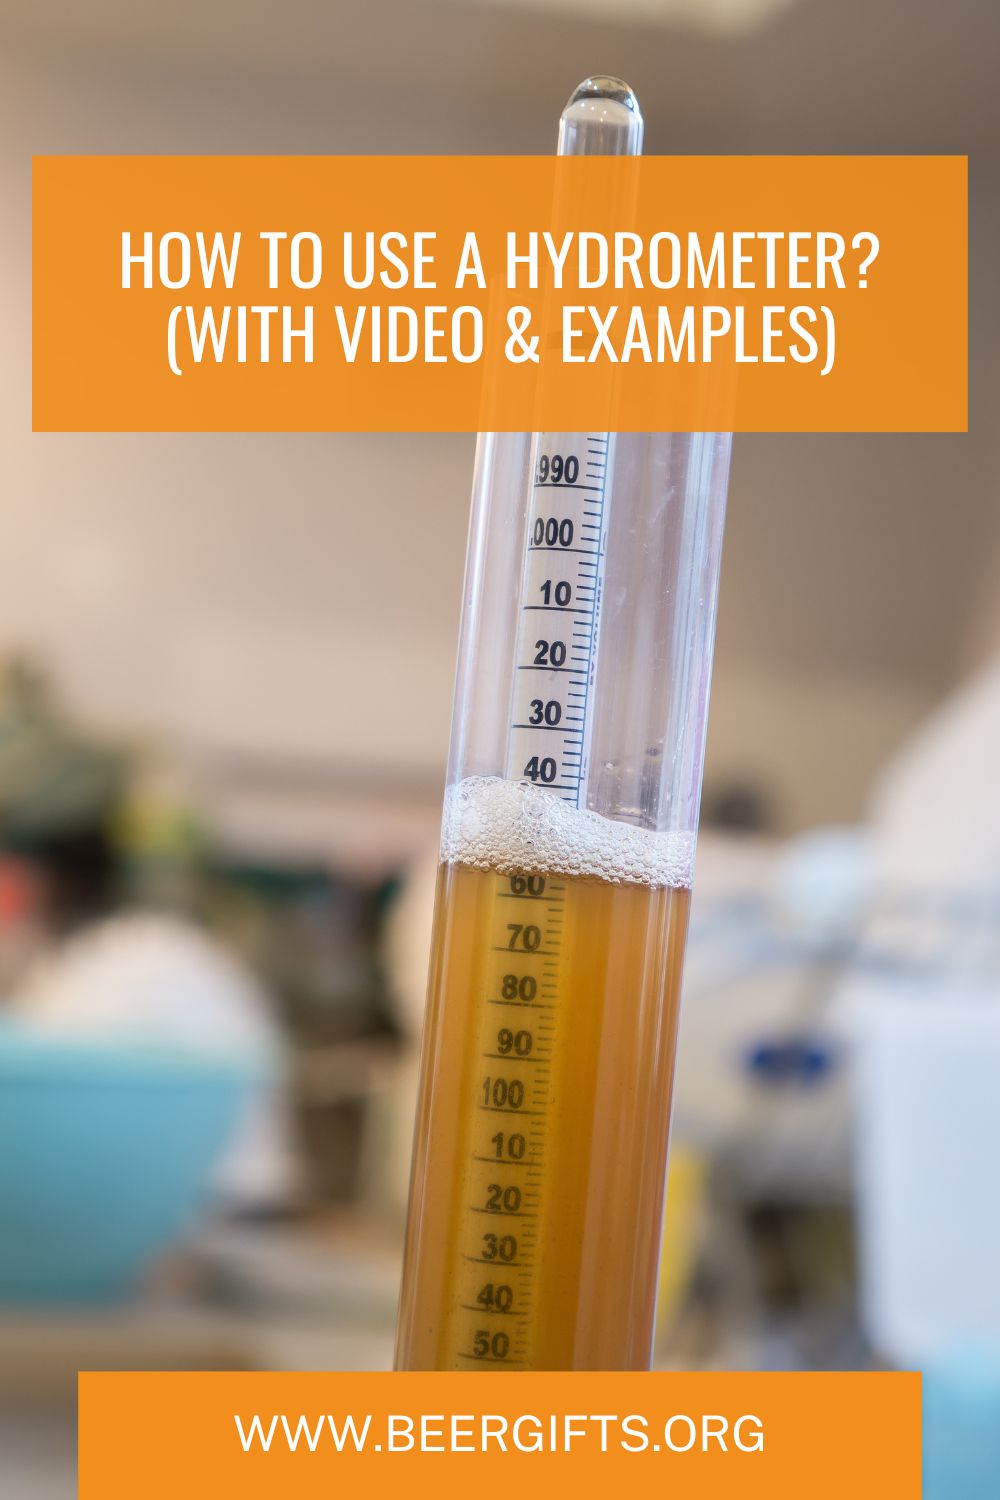 How to Use a Hydrometer?1